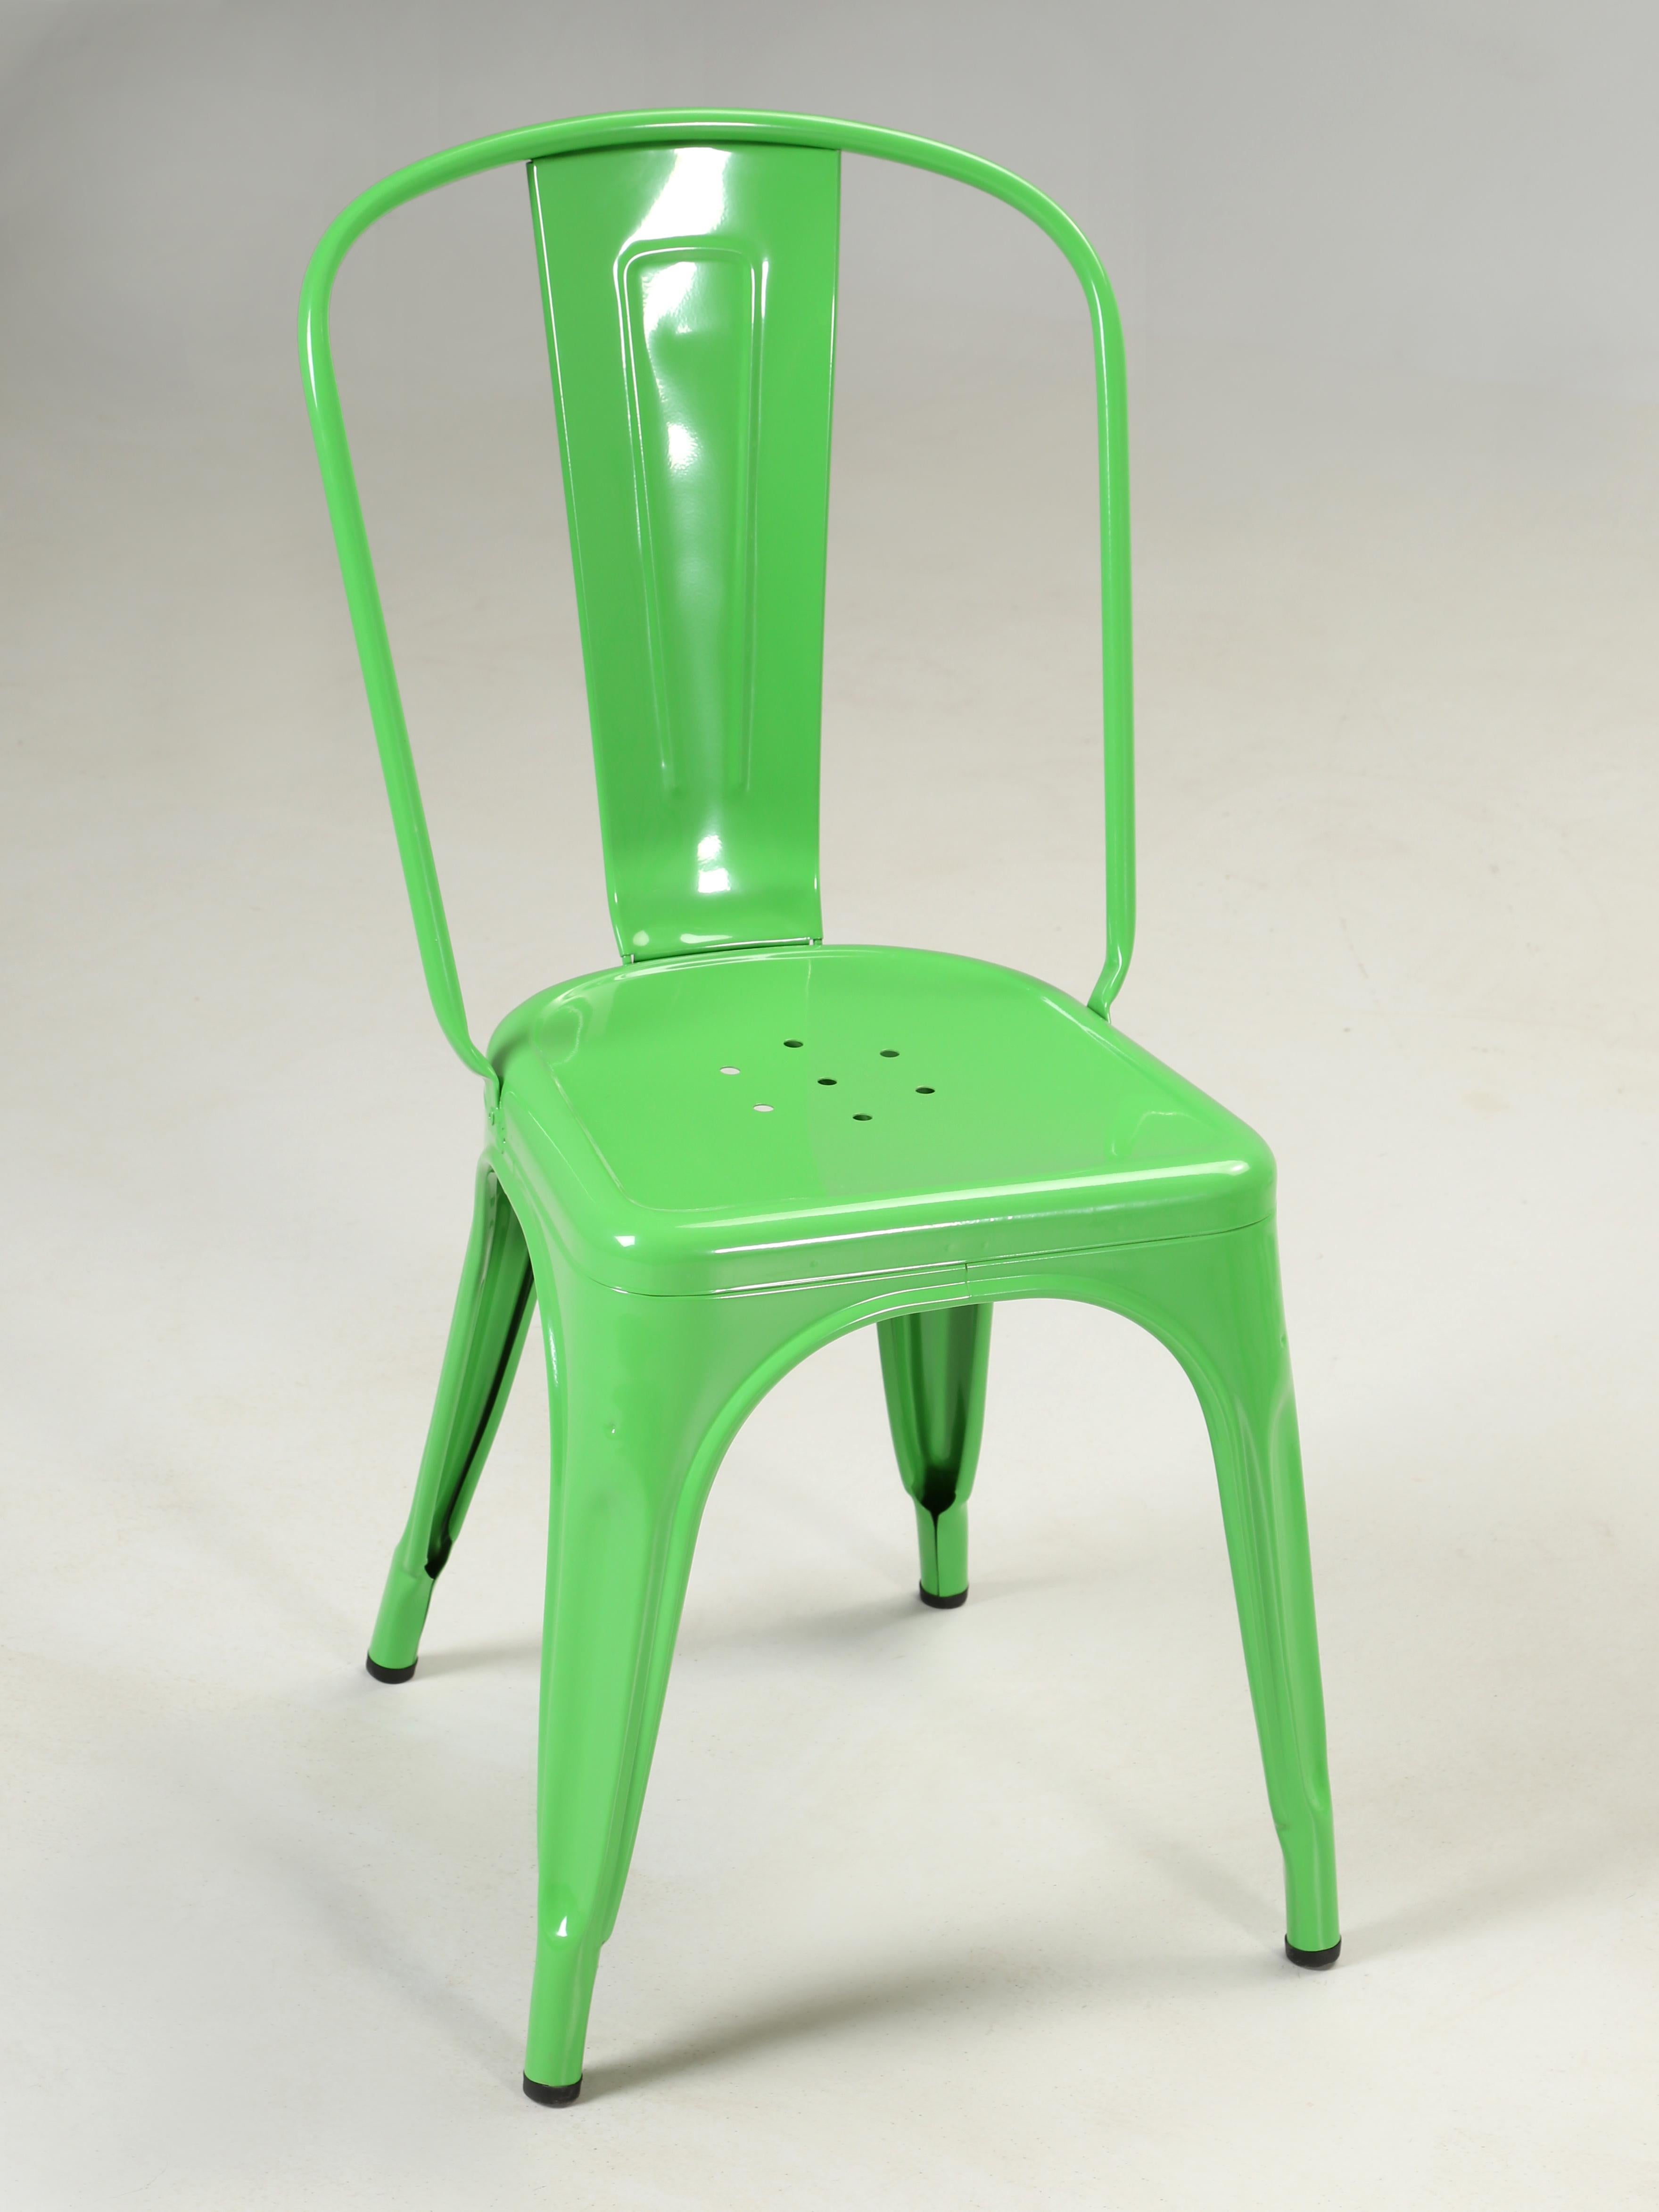 Painted Genuine French Bright Green Tolix Set '6' Steel Chairs, Cosmetic Flaws For Sale